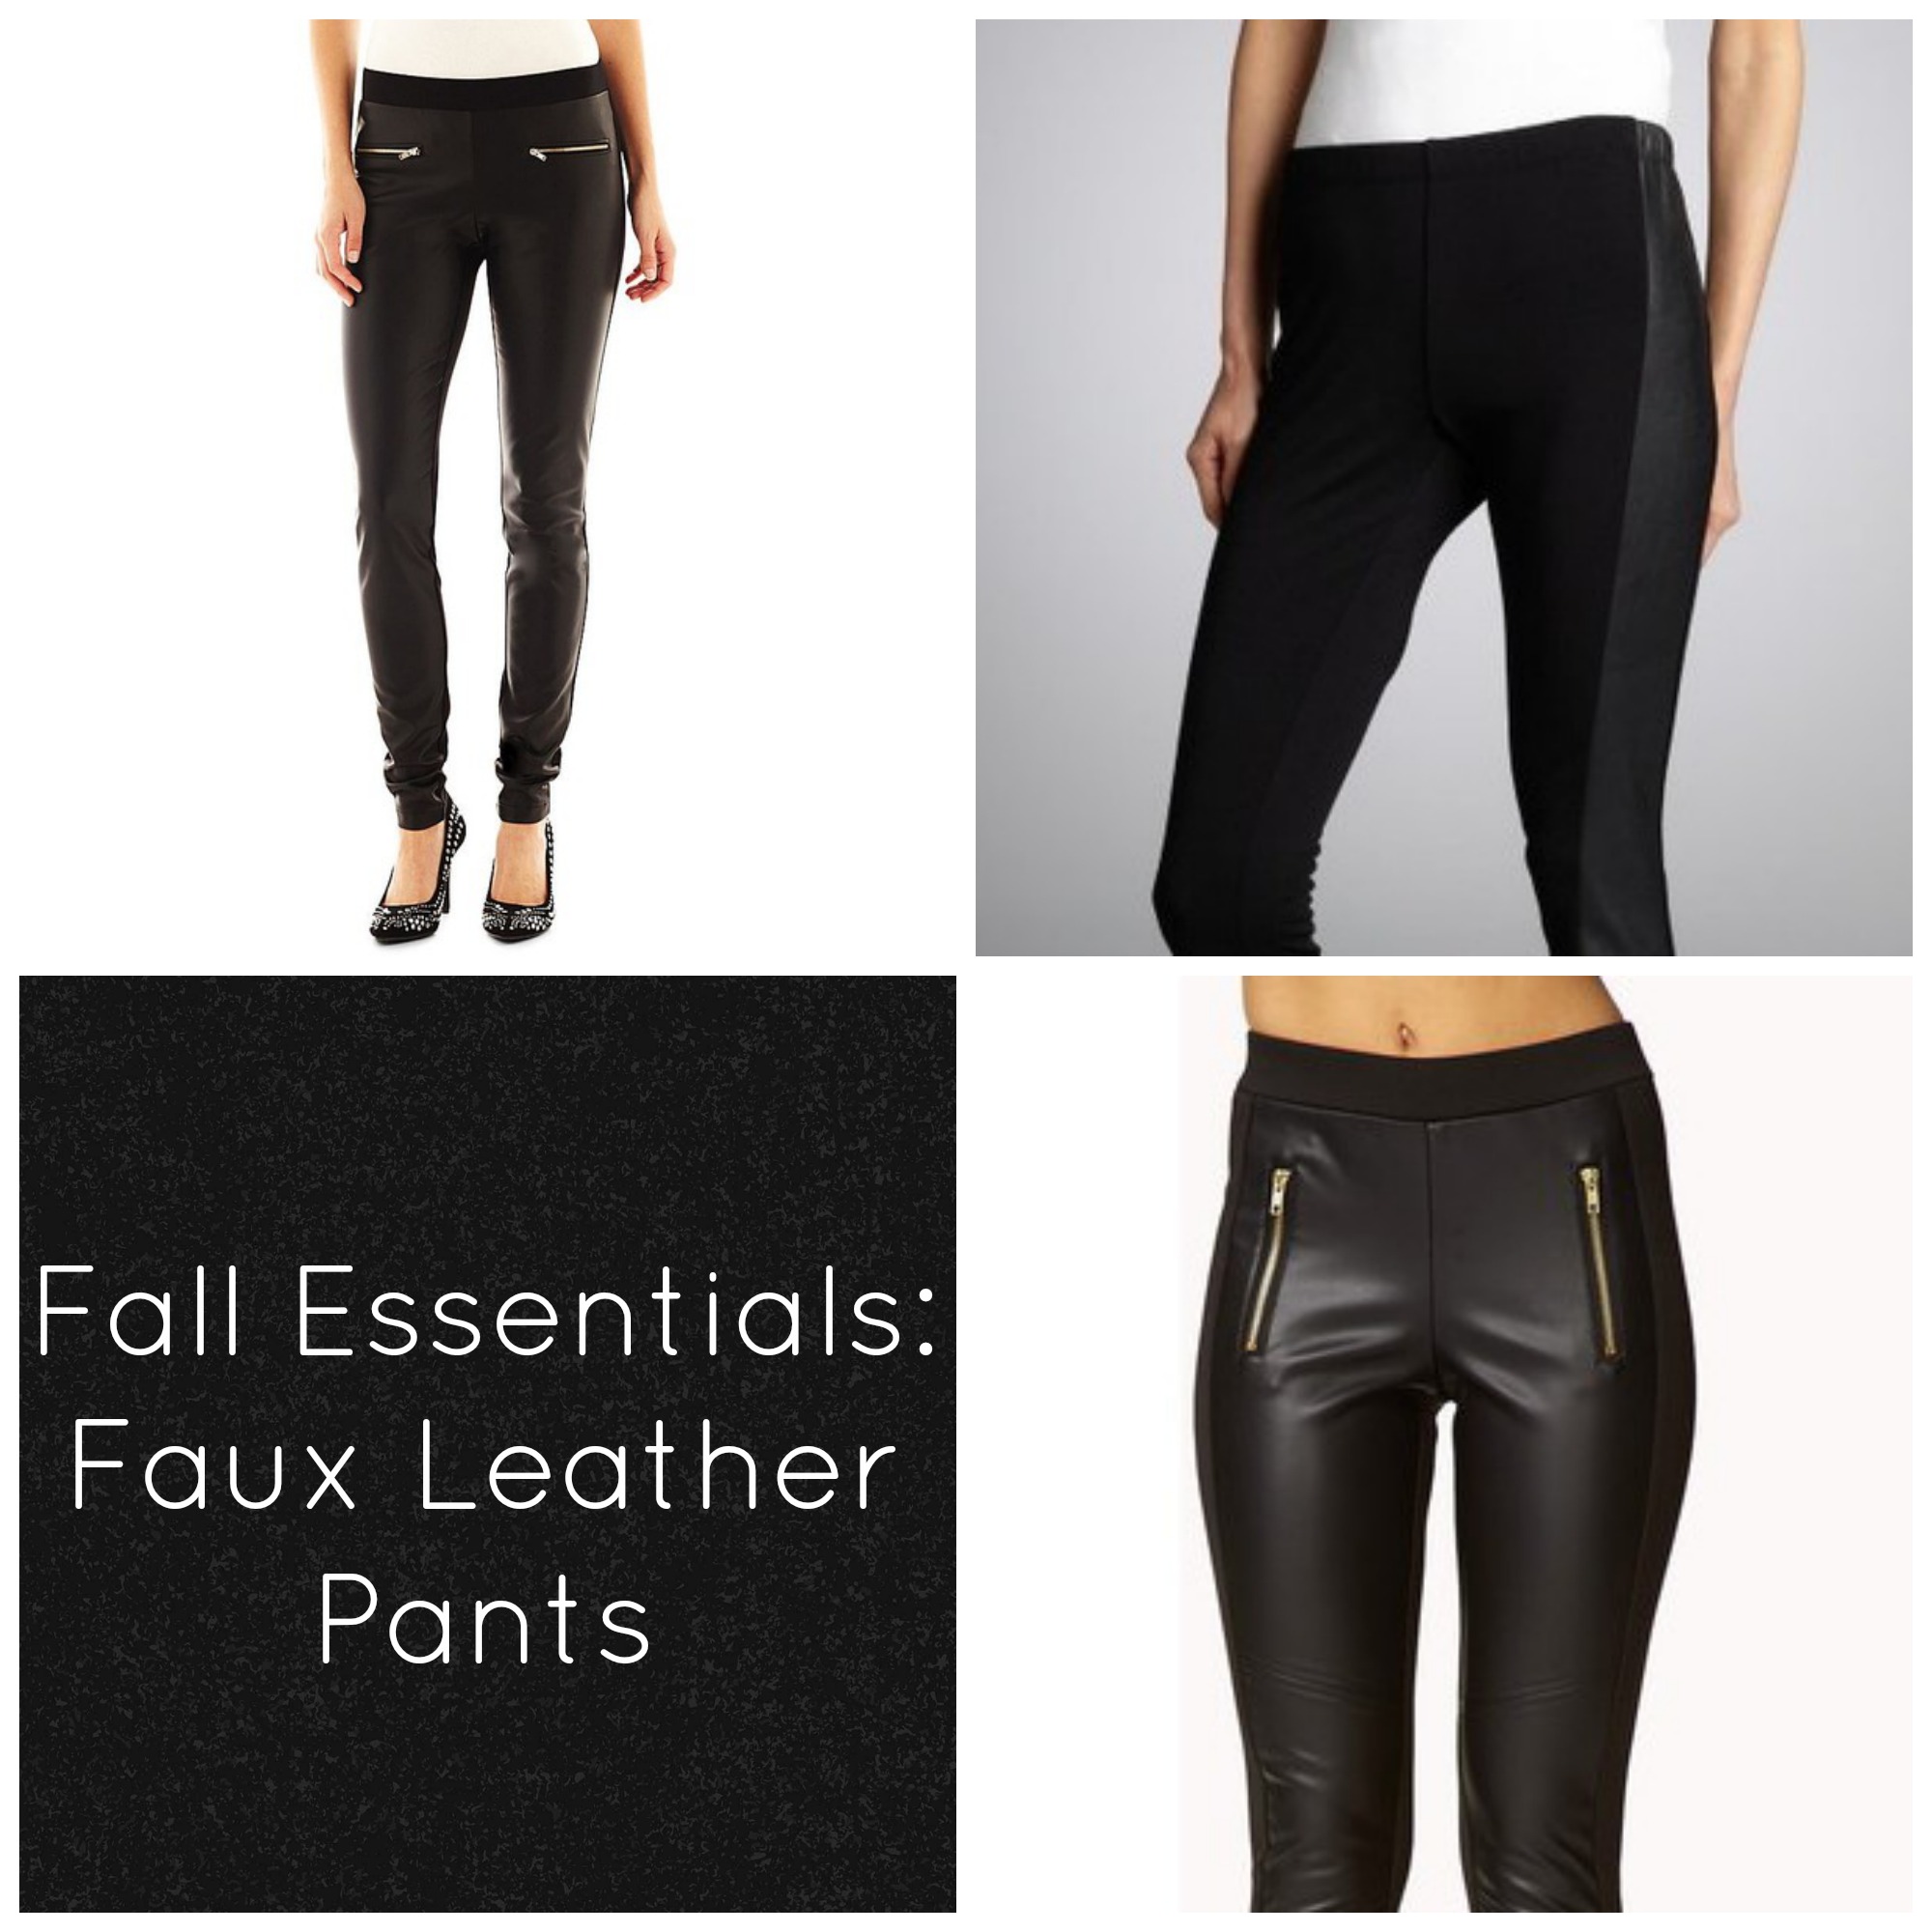 Fall Essentials | Faux Leather Pants | KP FUSION